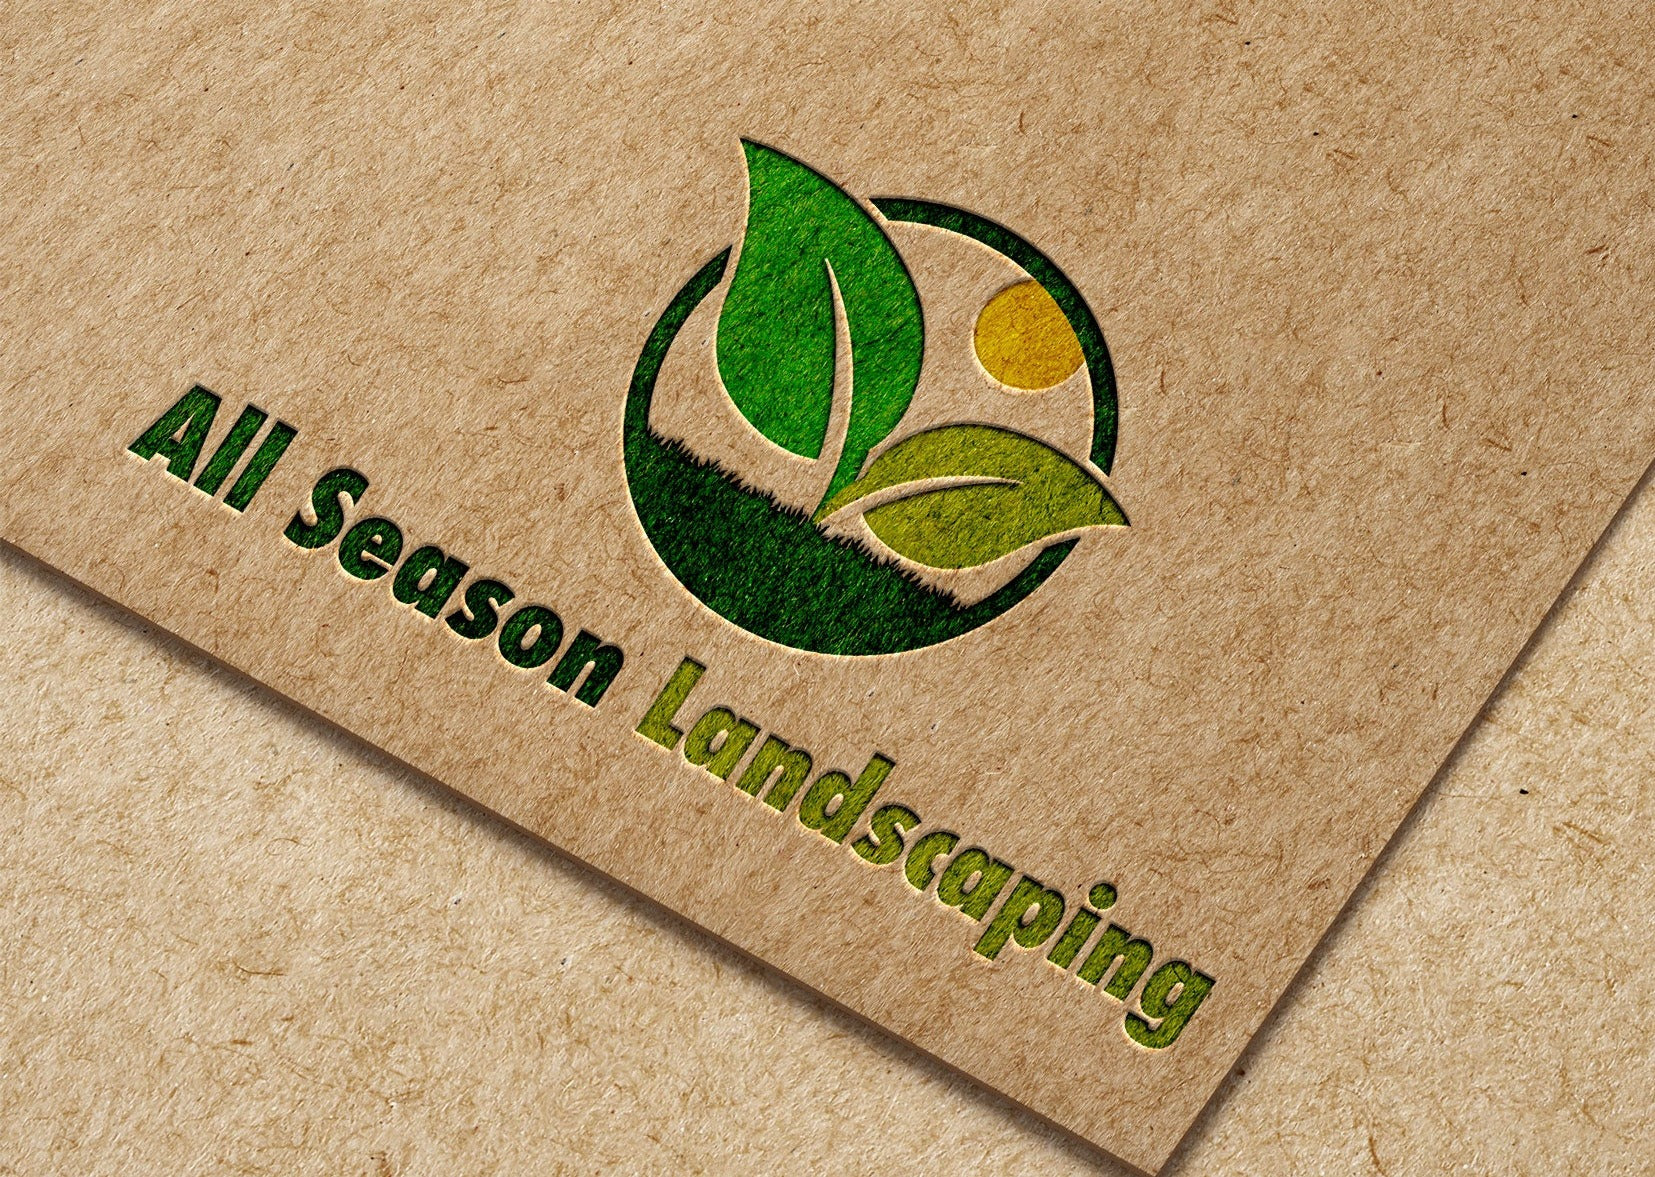 landscaping lawn care business company logo design